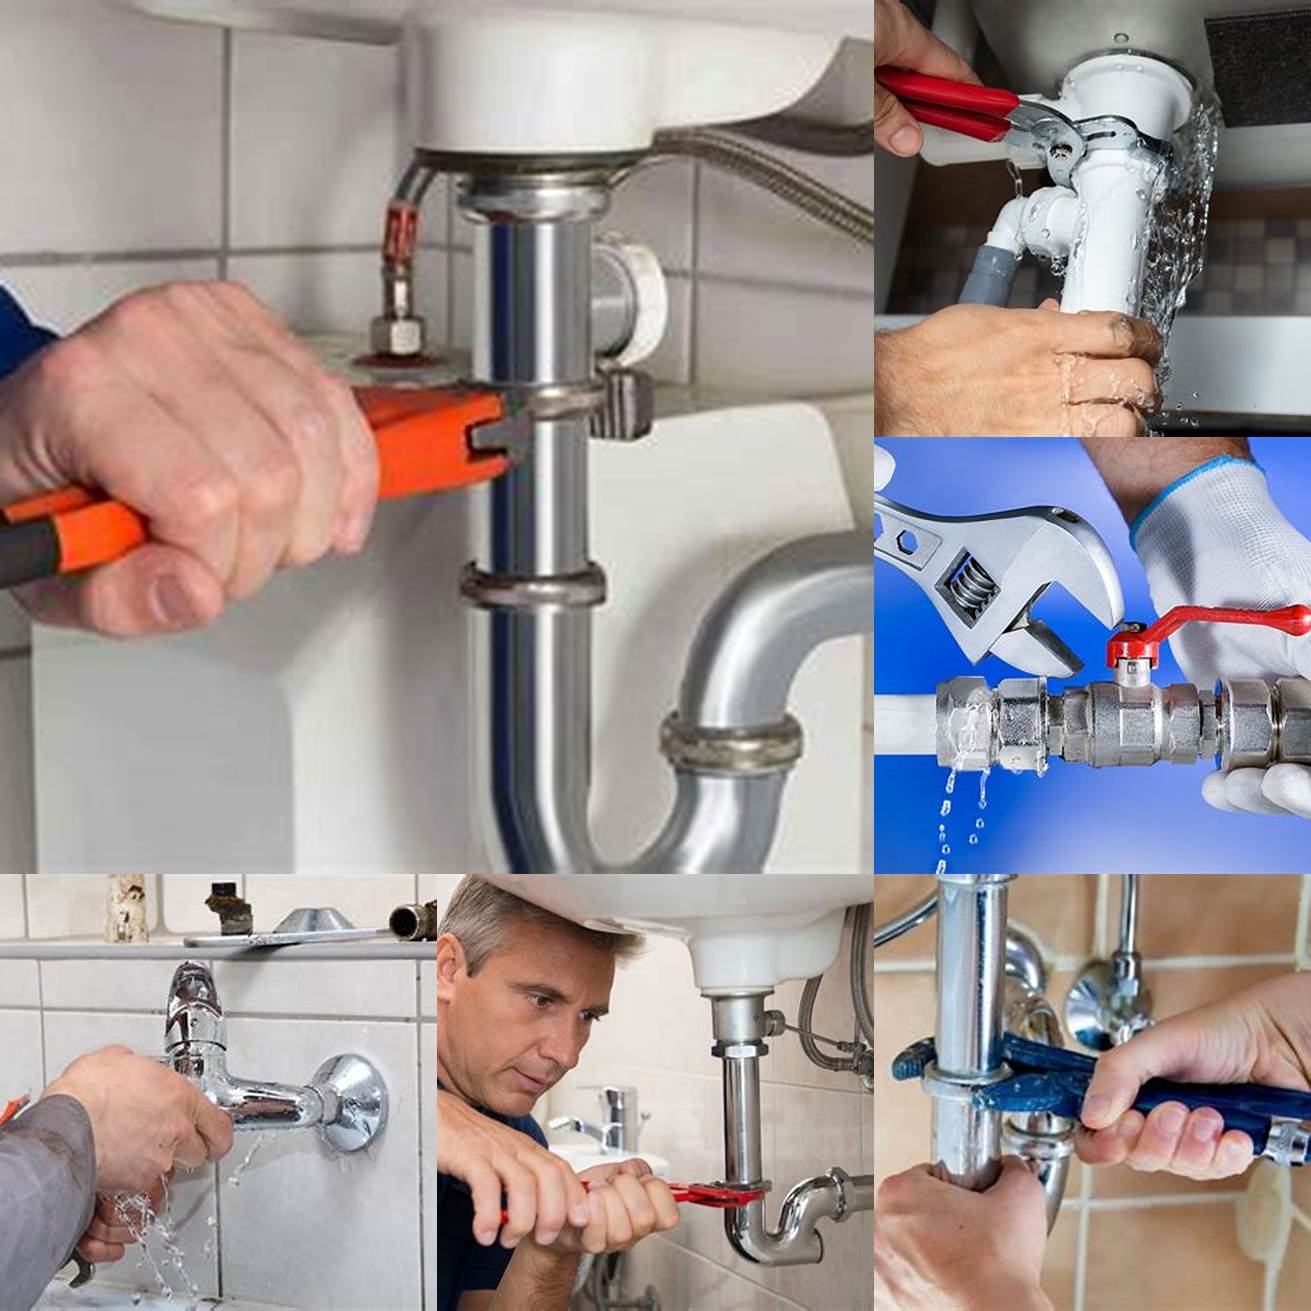 Check the plumbing and connections regularly for leaks or damage Repair or replace them as needed